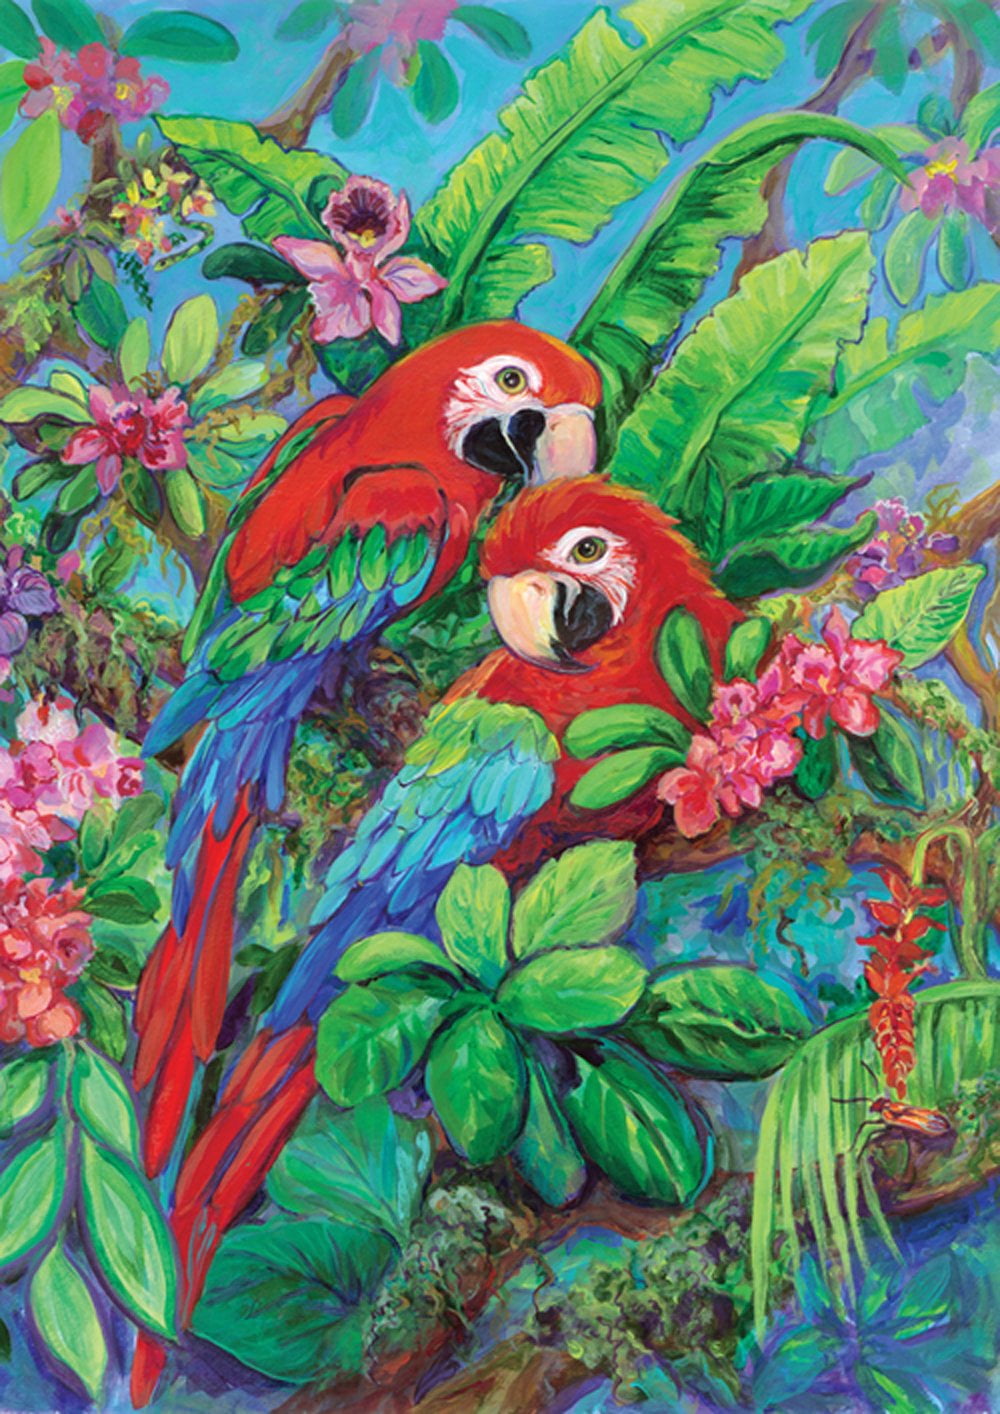 NEW LARGE TOLAND HOUSE FLAG BEAUTIFUL SCARLET MACAWS PARROTS MACAW 28 X 40 